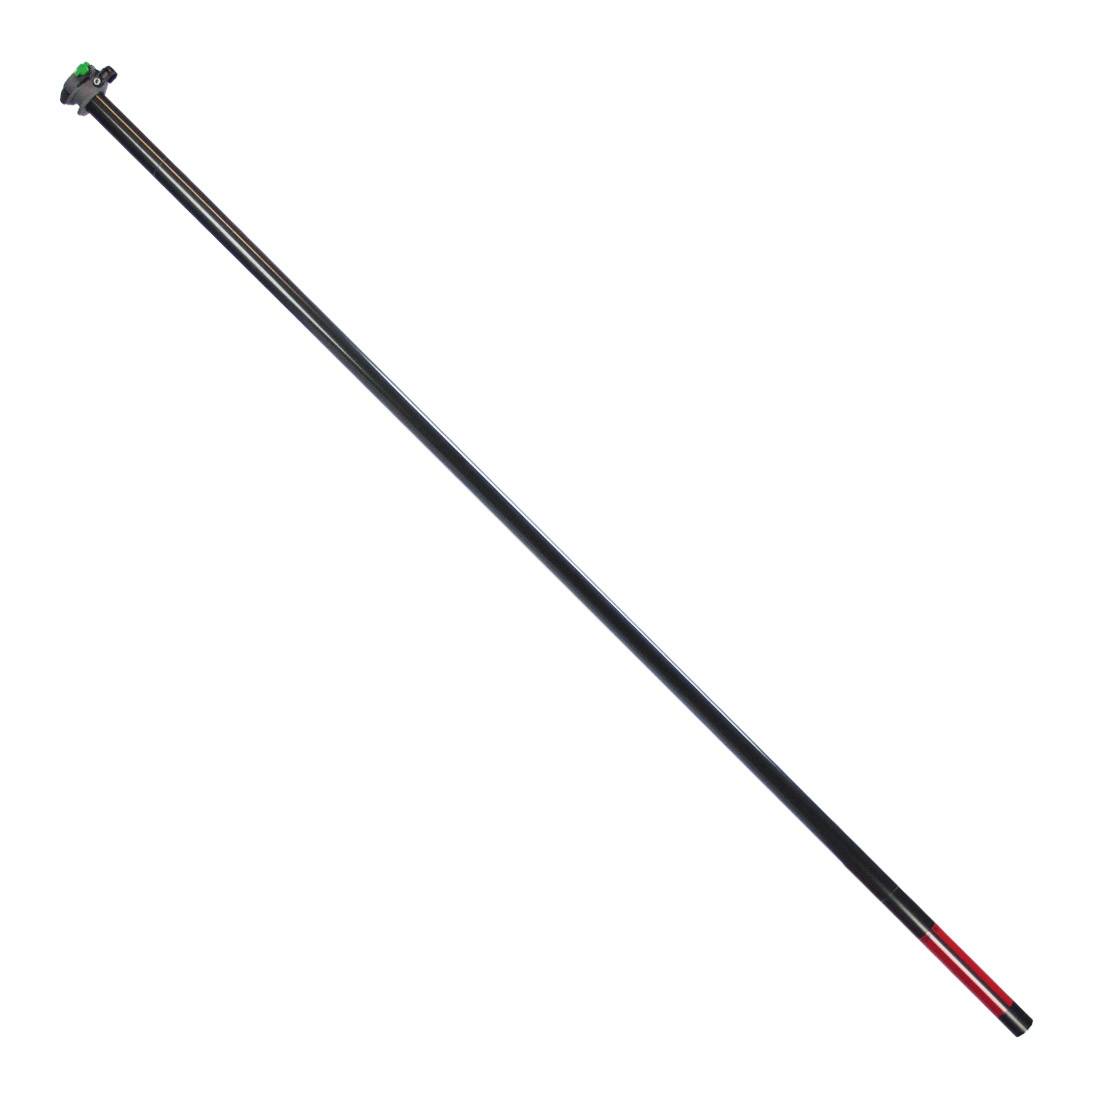 Unger nLite Hybrid Master Pole Replacement Section